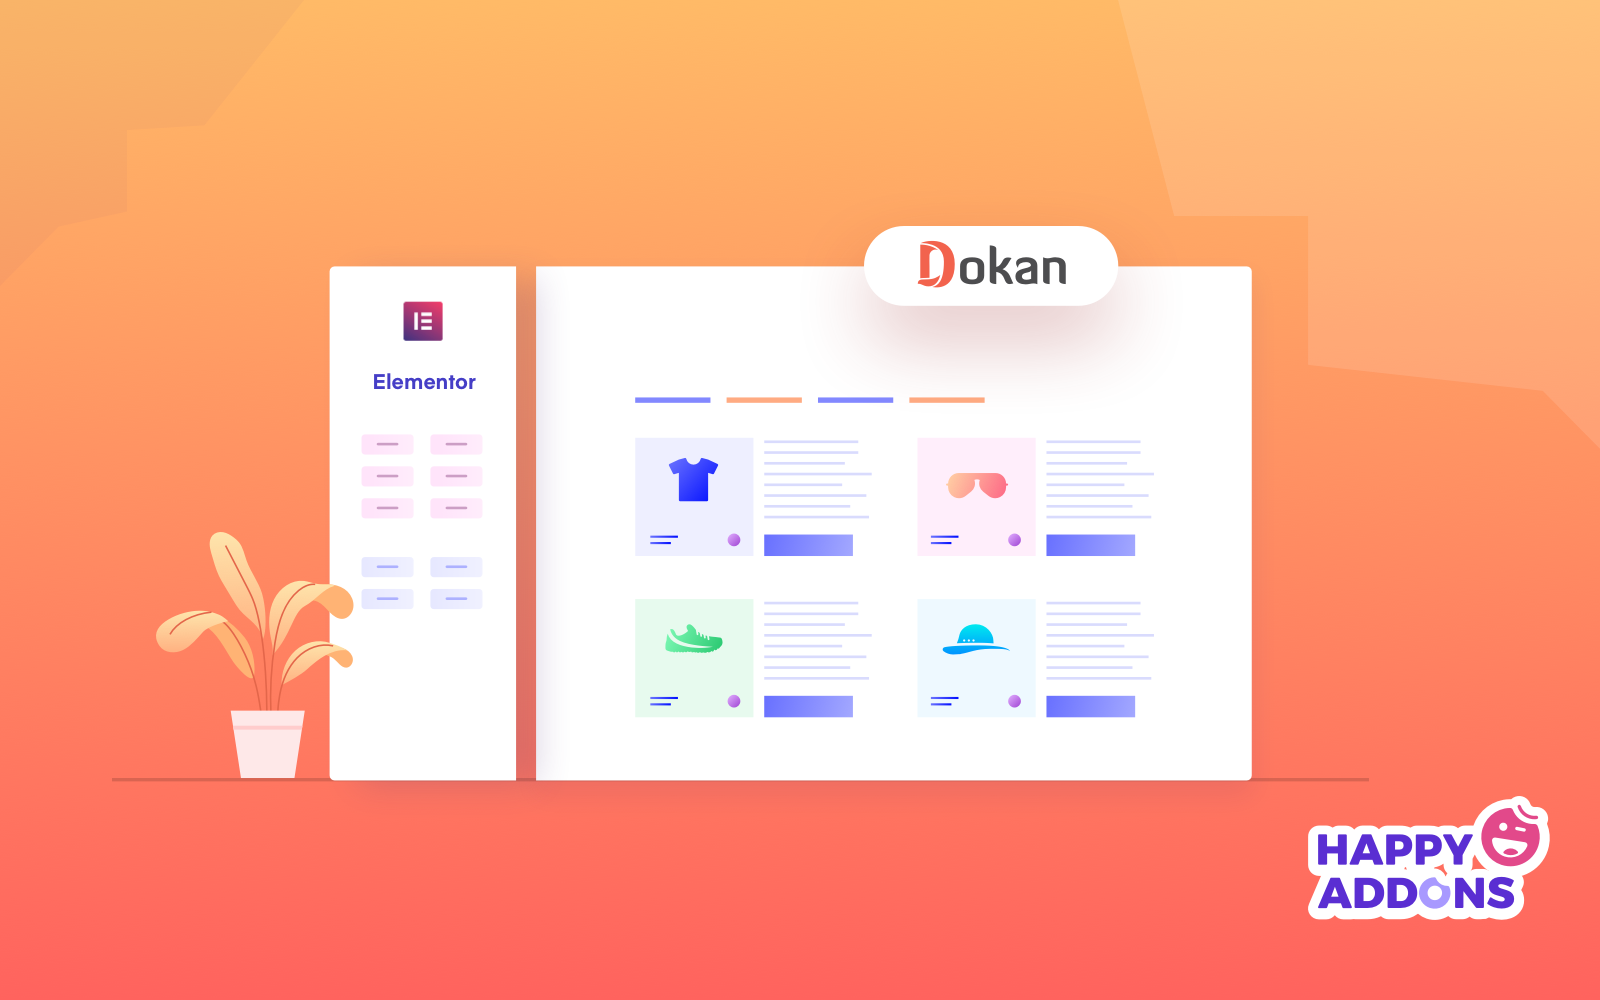 build an eCommerce marketplace with Dokan and Elementor